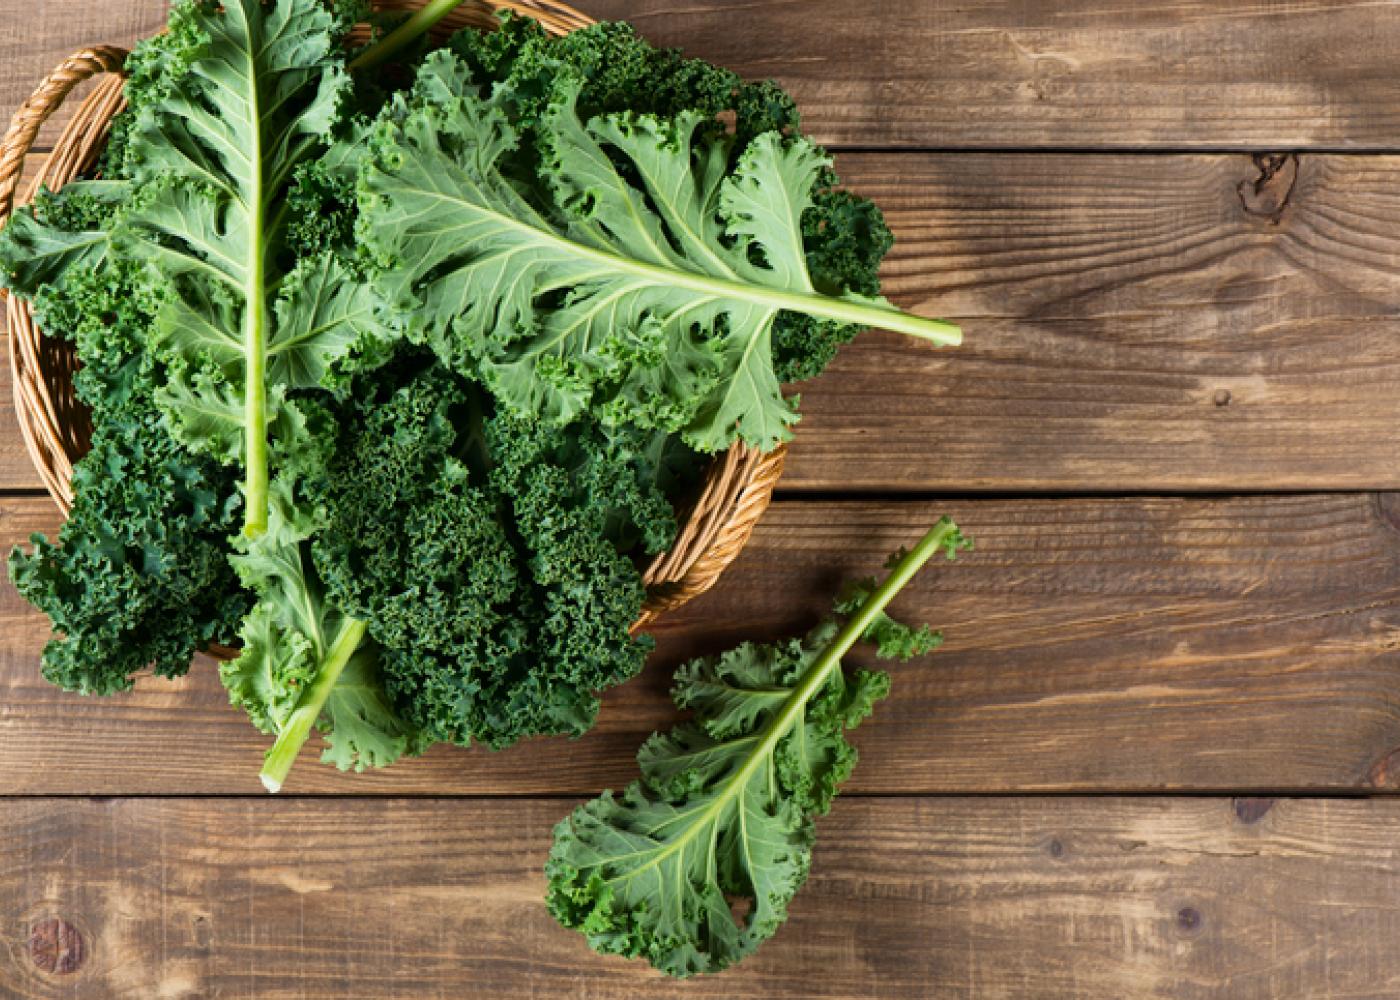 Can We *Actually* Reveal an Accurate Truth About You Purely Based on Your Food Decisions? Kale